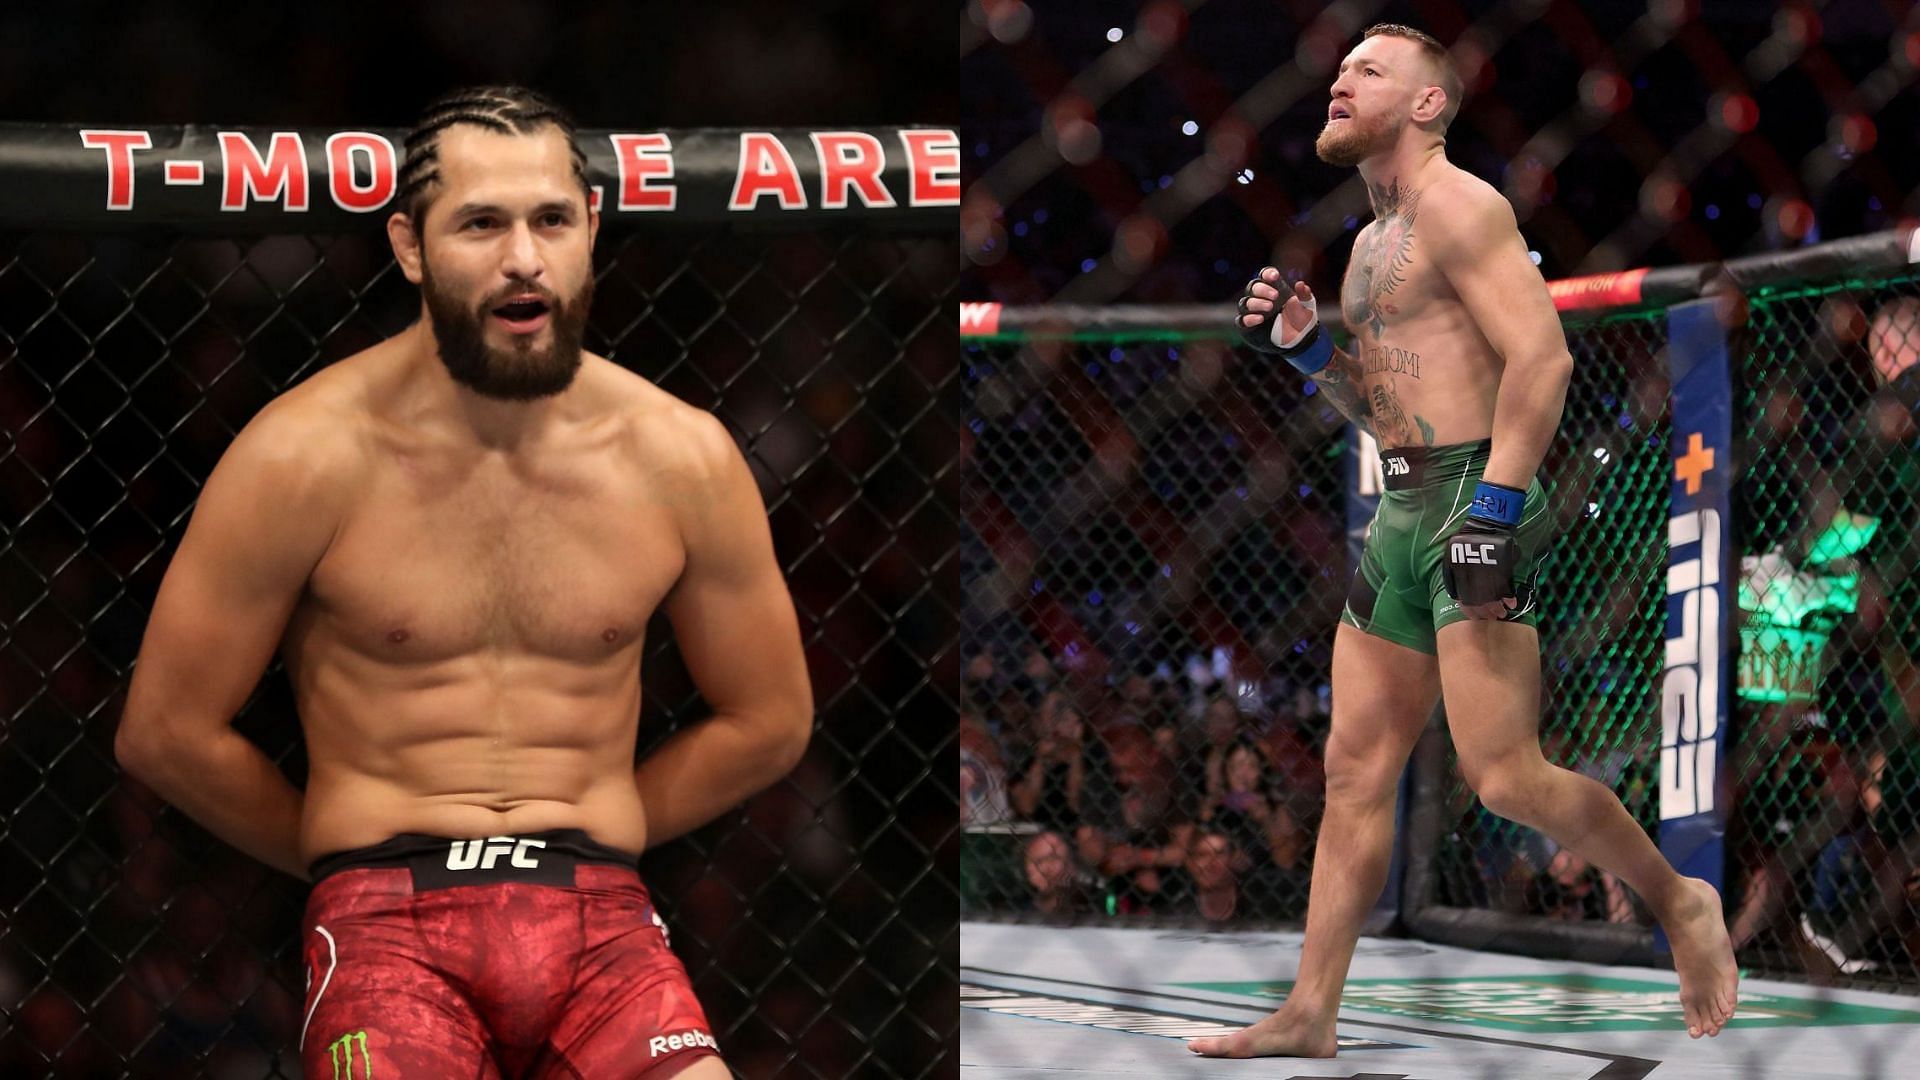 Jorge Masvidal (Left) and Conor McGregor (Right) (Images courtesy of getty)